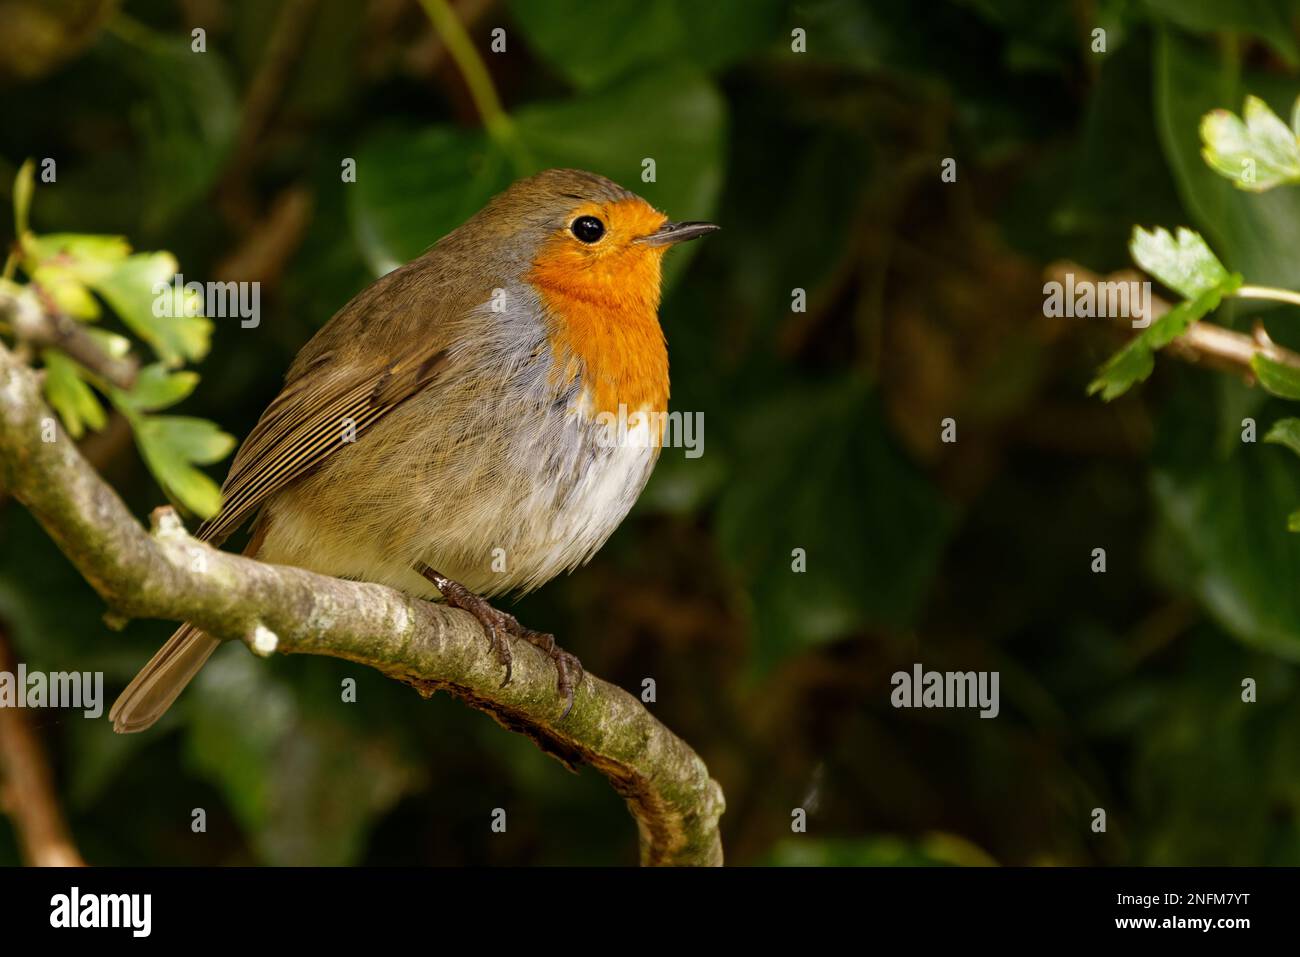 Robin Redbrest (Erithacus rubecula) perched on branch Stock Photo